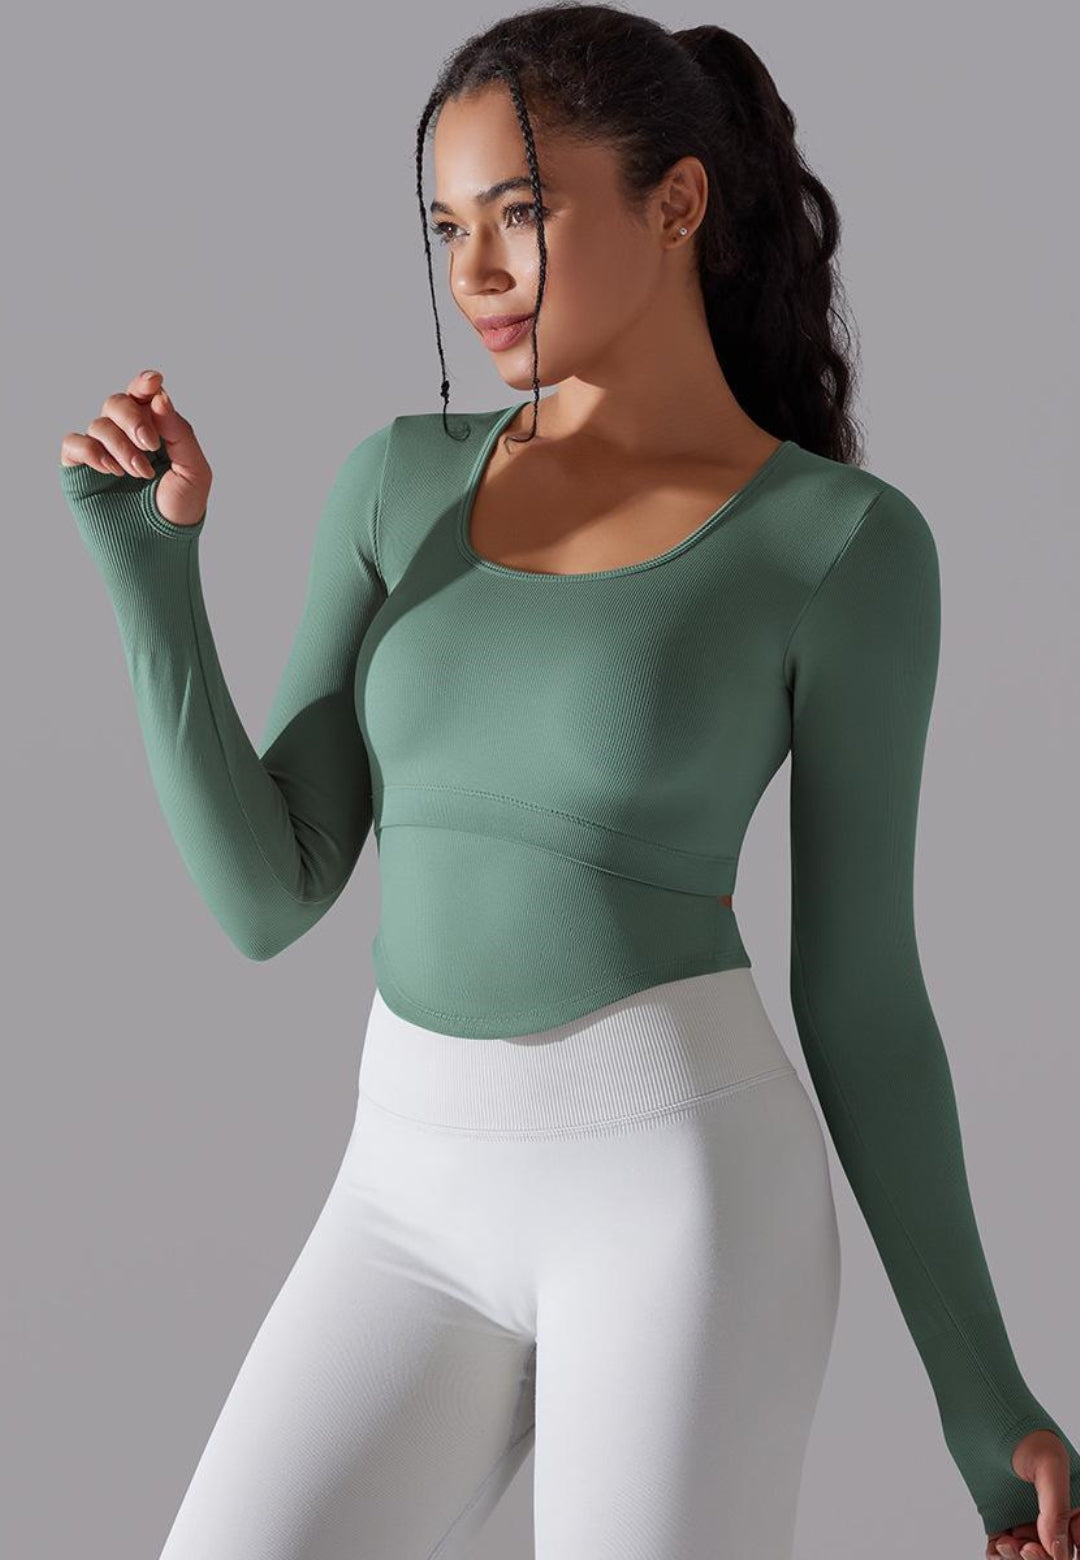 Cutout Back Curved Hem Sports Top  for the young